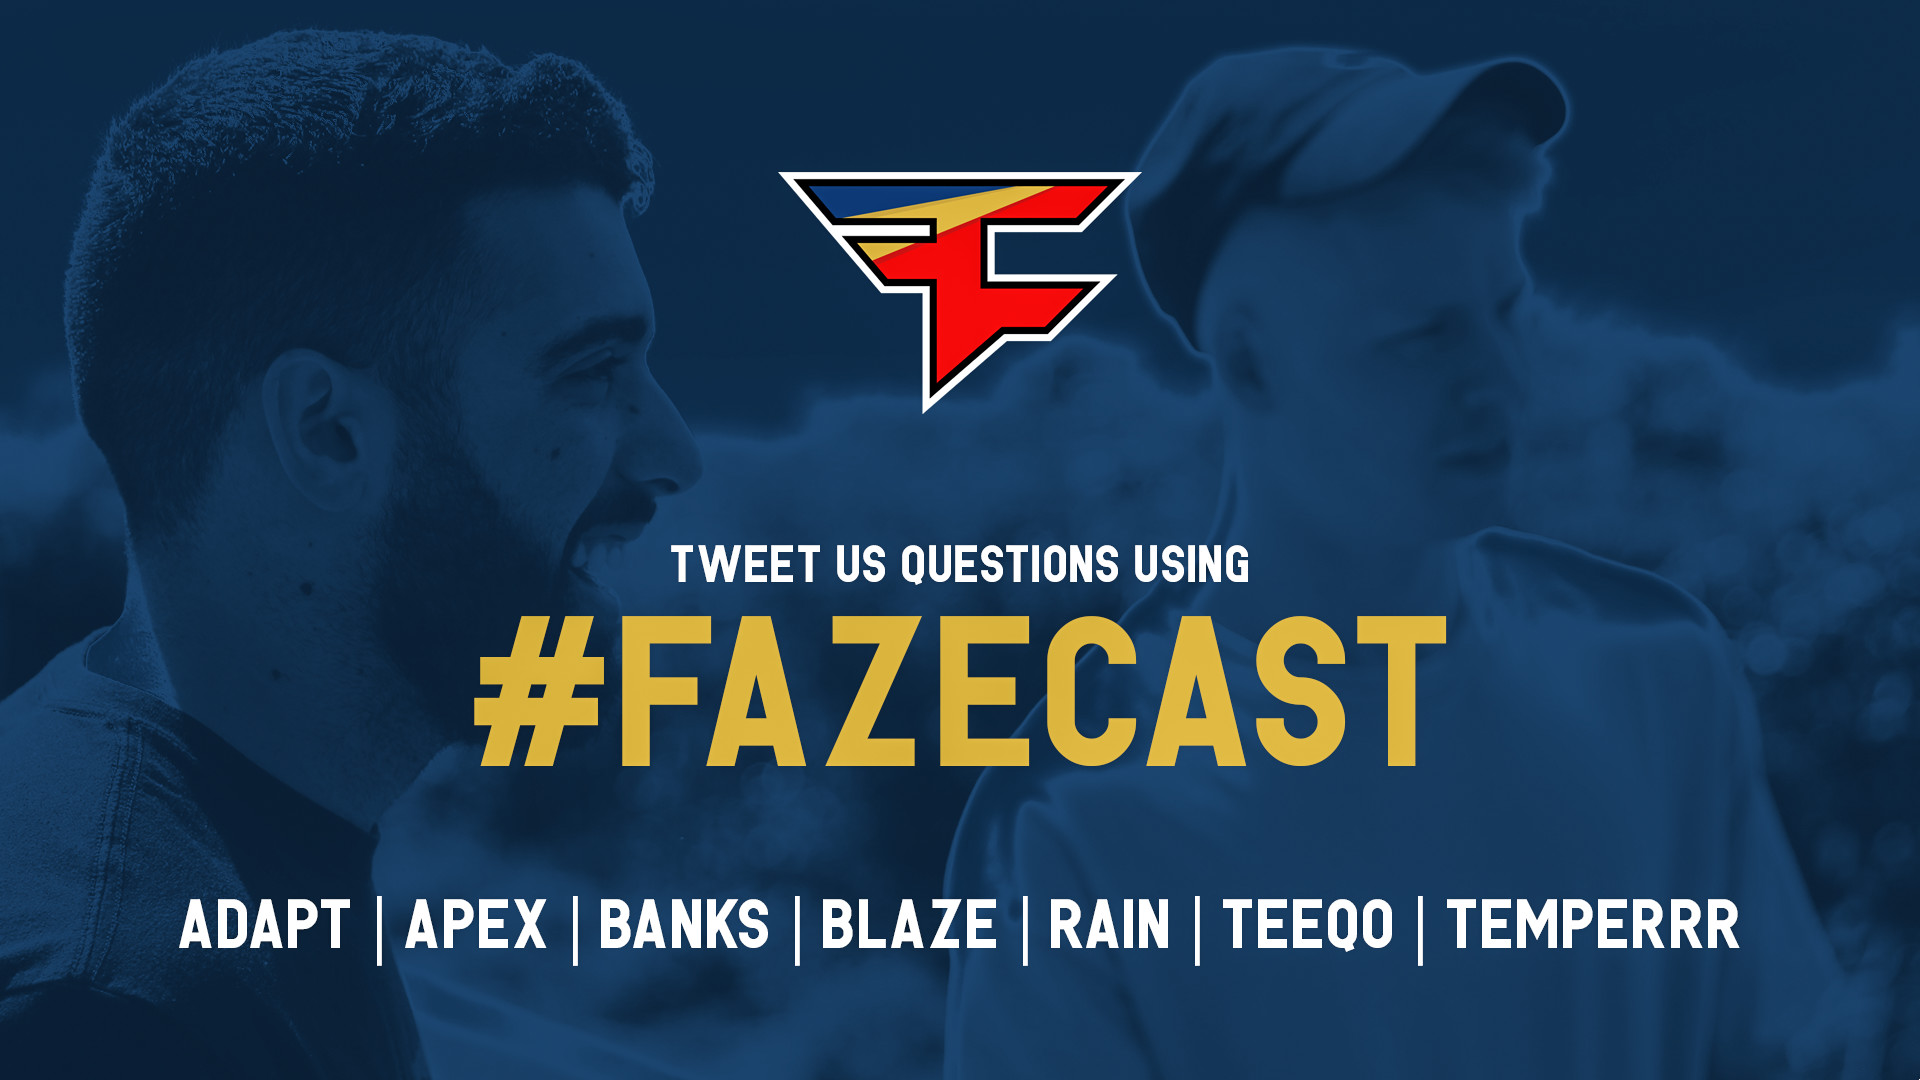 1920x1080 FaZe Clan on Twitter: "FAZE PODCAST: What have you always wanted to know  about FaZe Clan? Tweet us your questions now to be part of our first show!